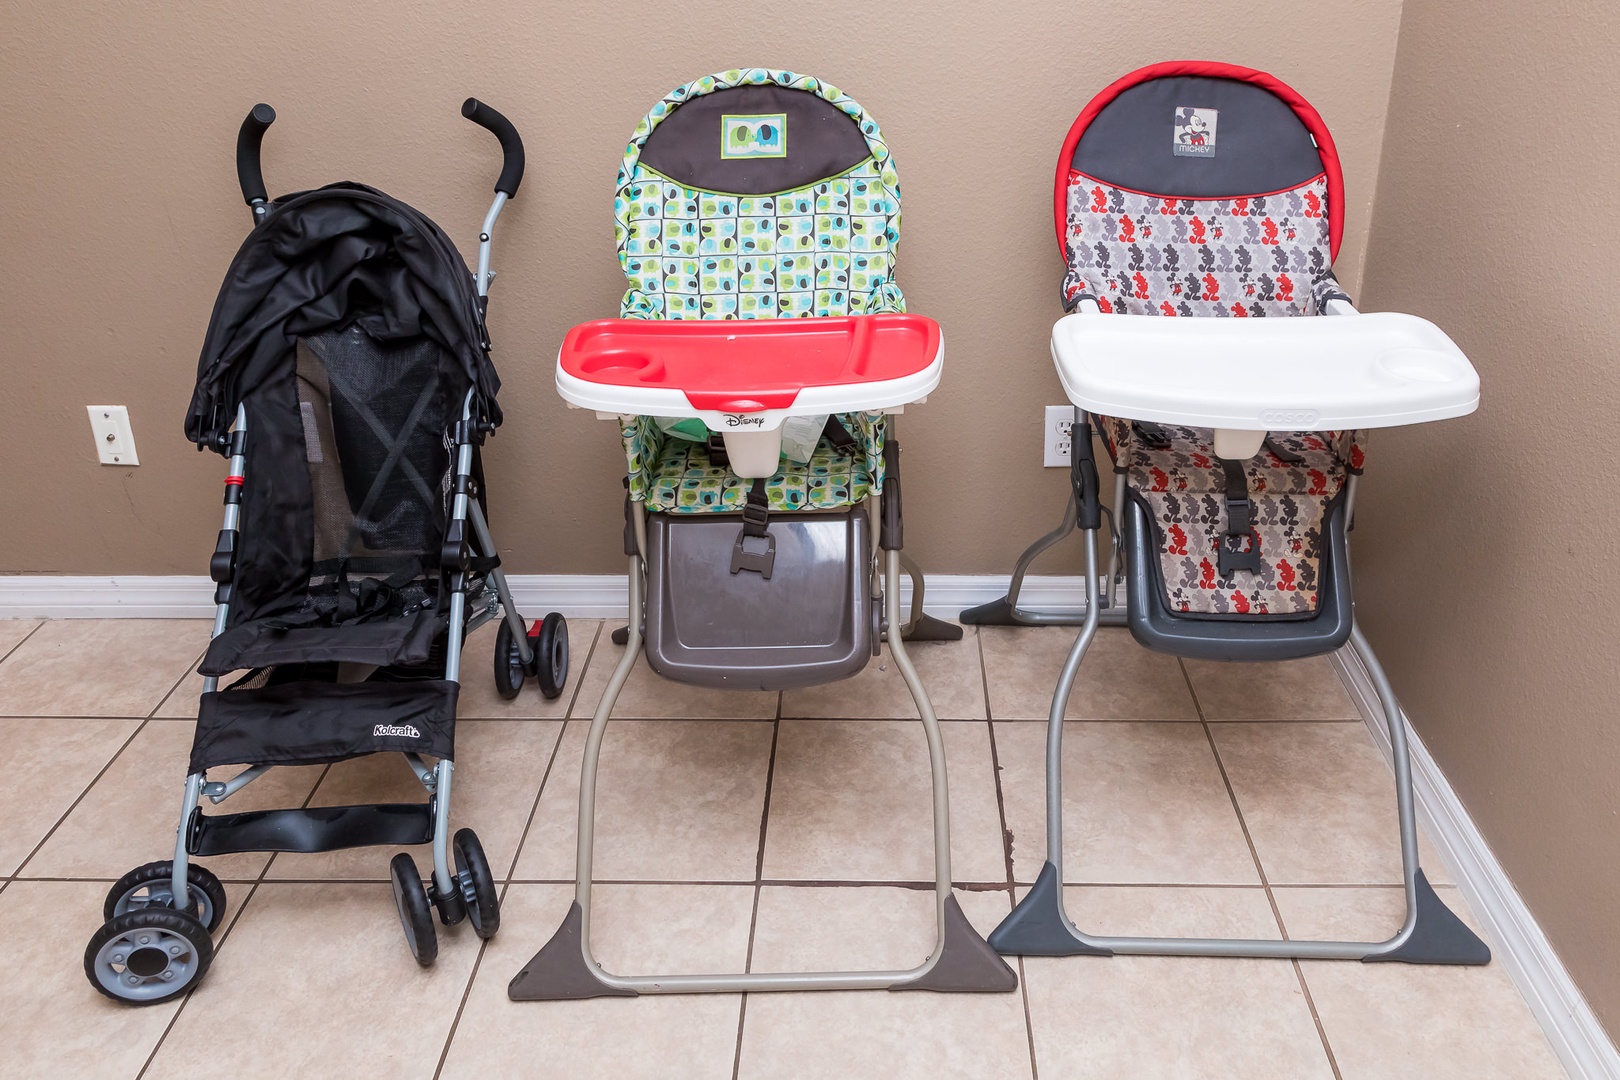 High chairs and stroller